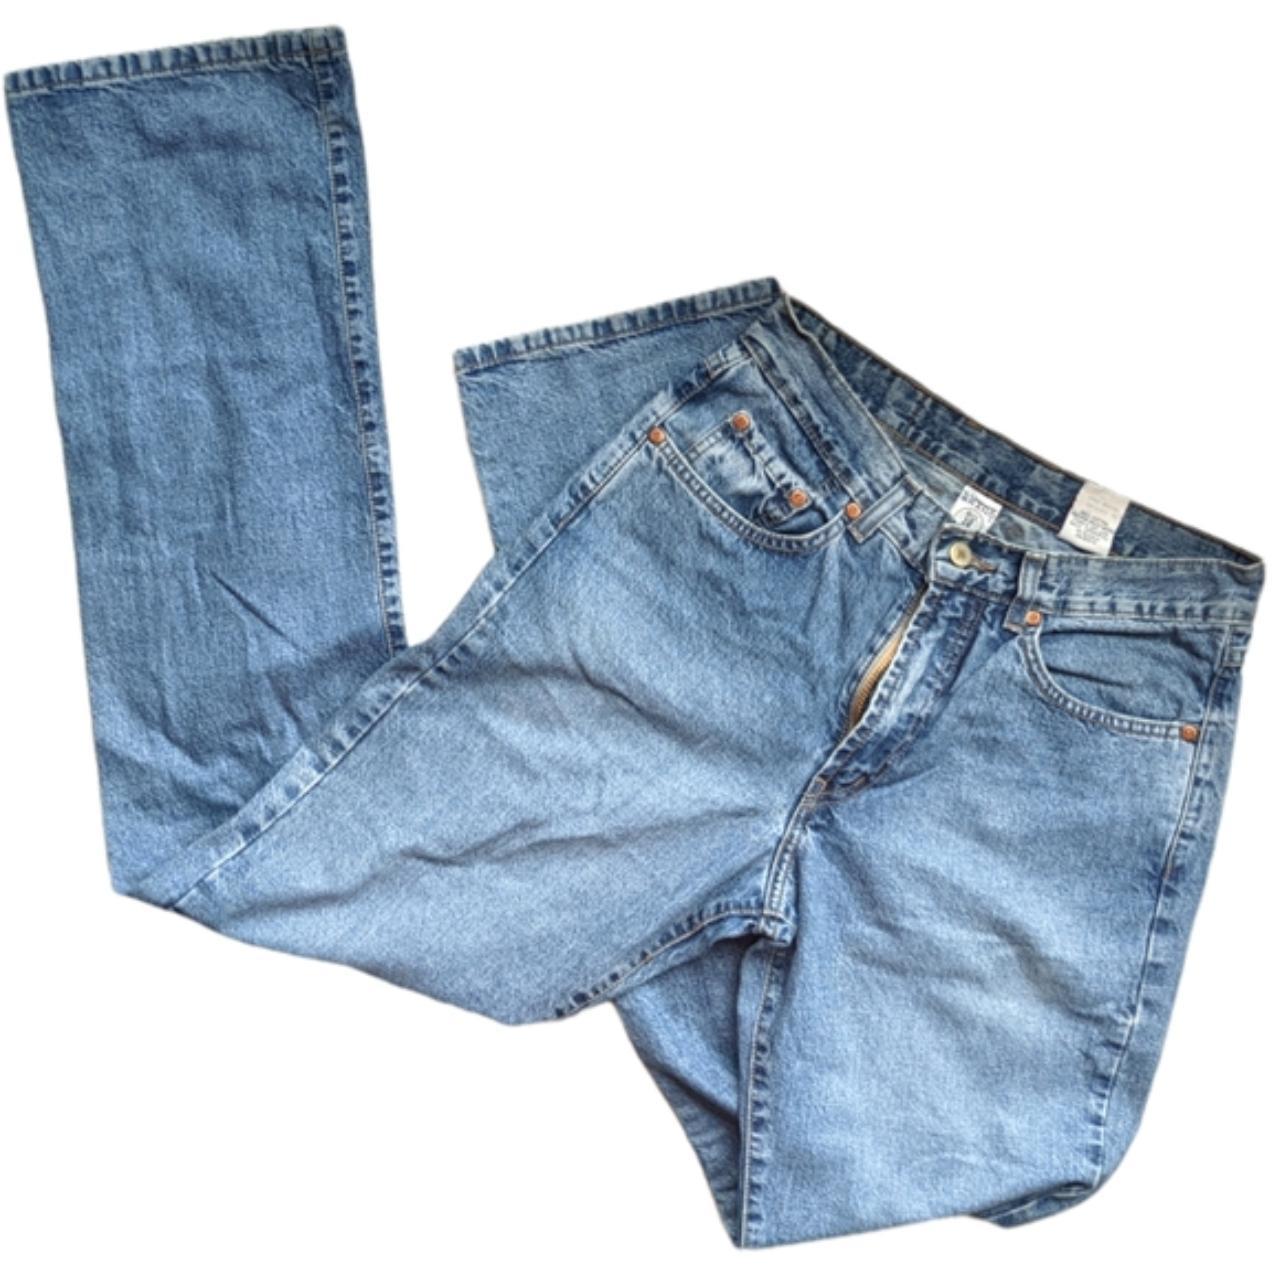 Product Image 3 - Vintage Dungarees American made Jeans